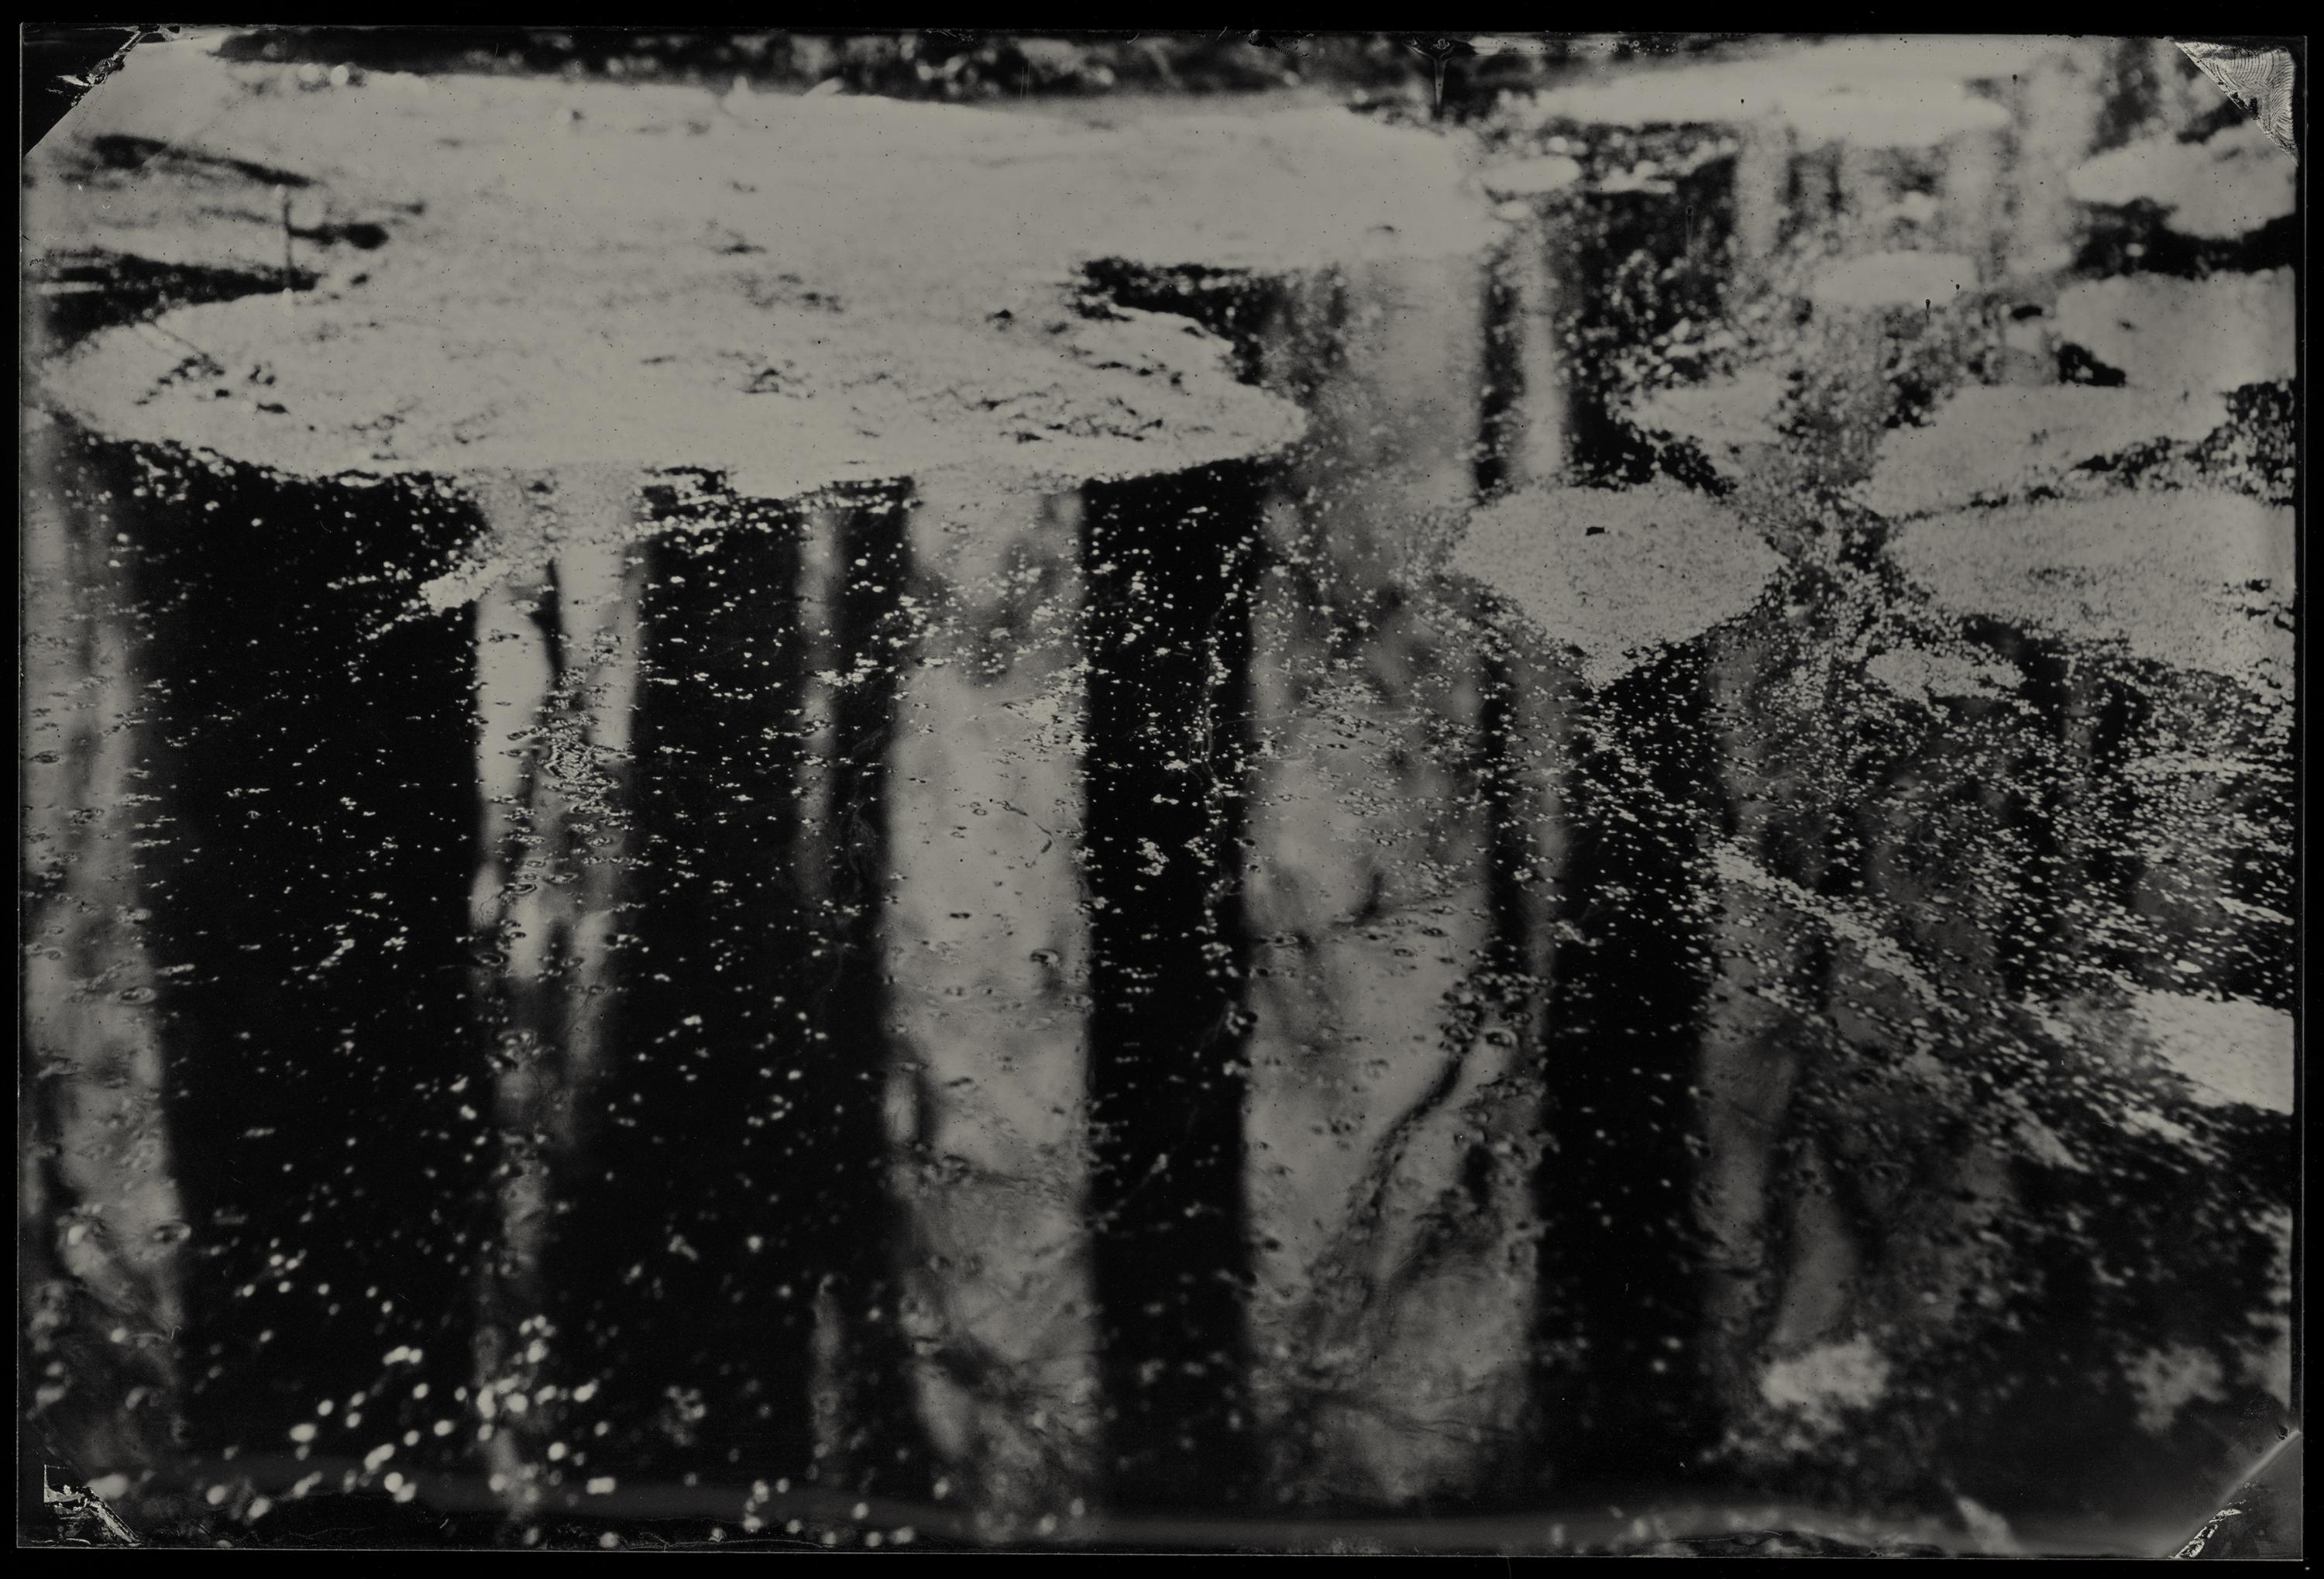 Mirror World - wet plate collodion - landscape photography - water - Photograph by Cecilia Montalvo & Charlie McCullers